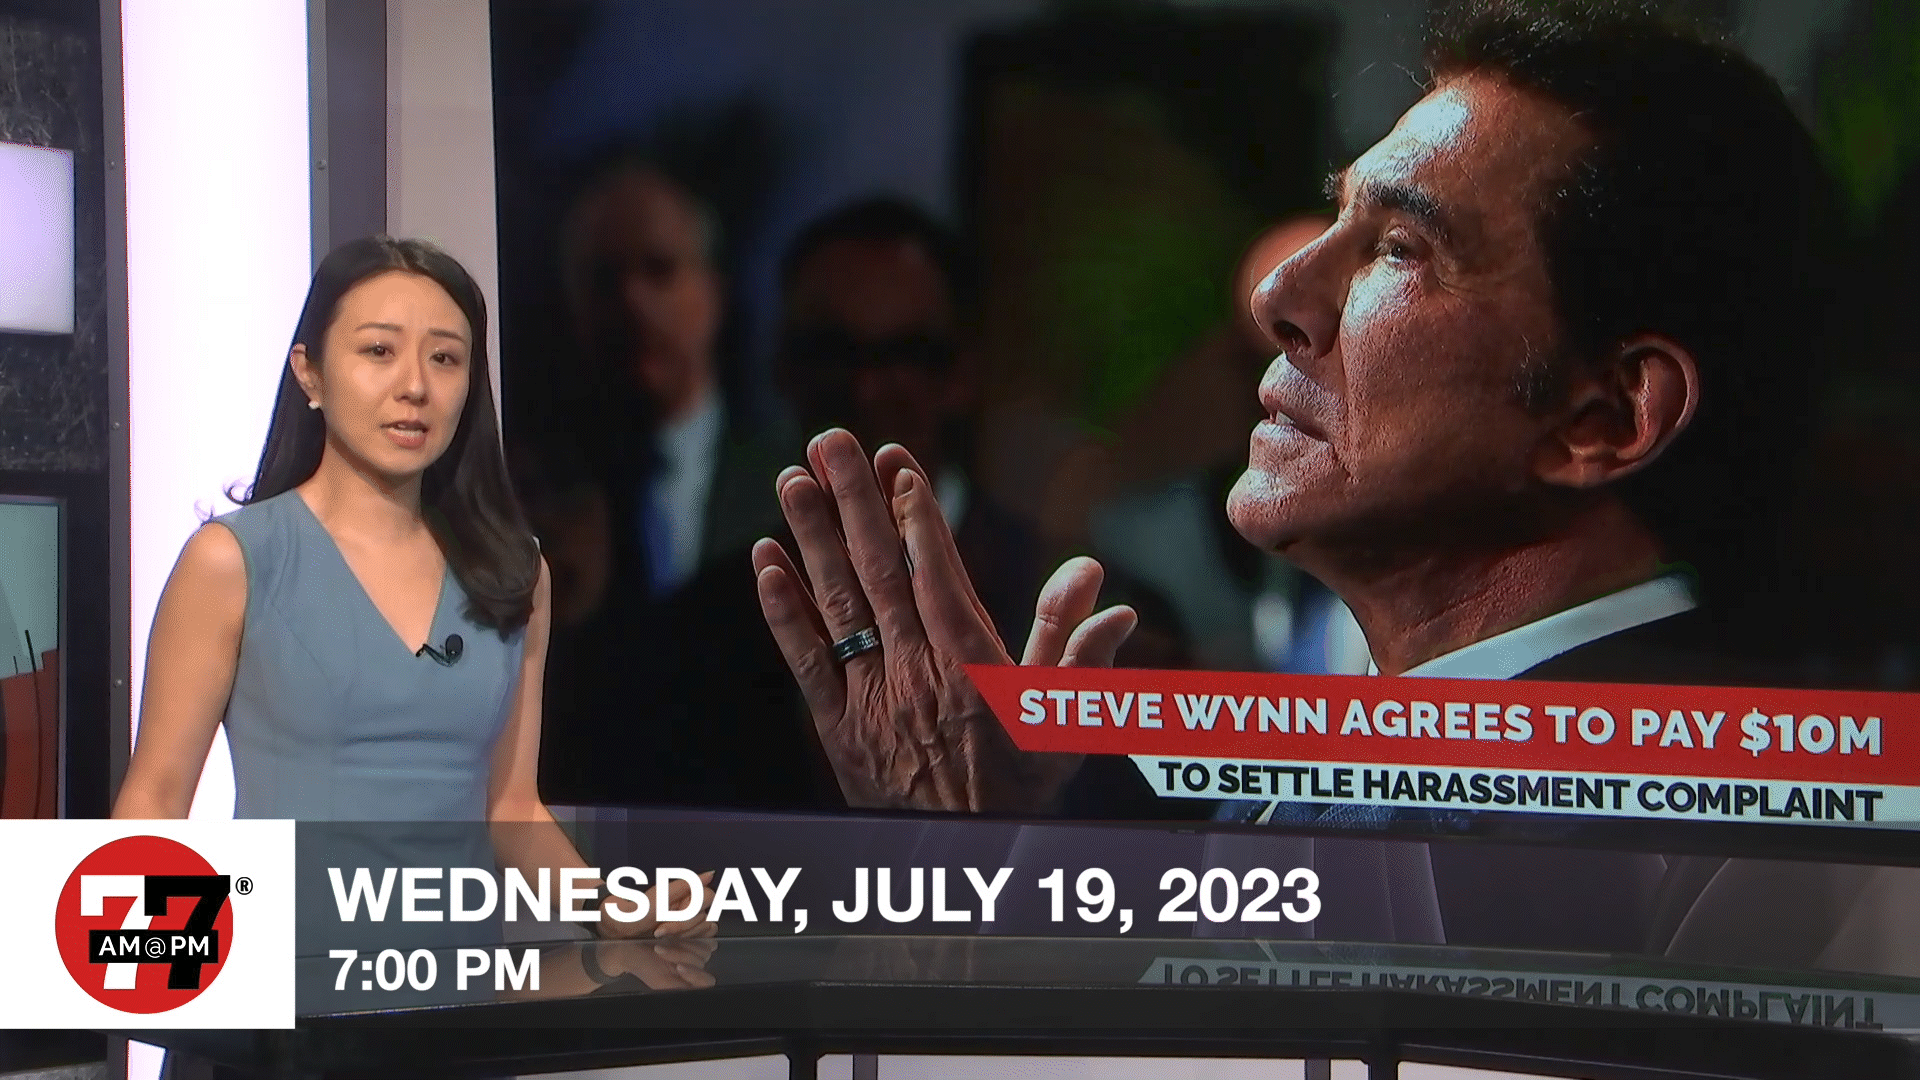 7@7PM for Wednesday, July 19, 2023